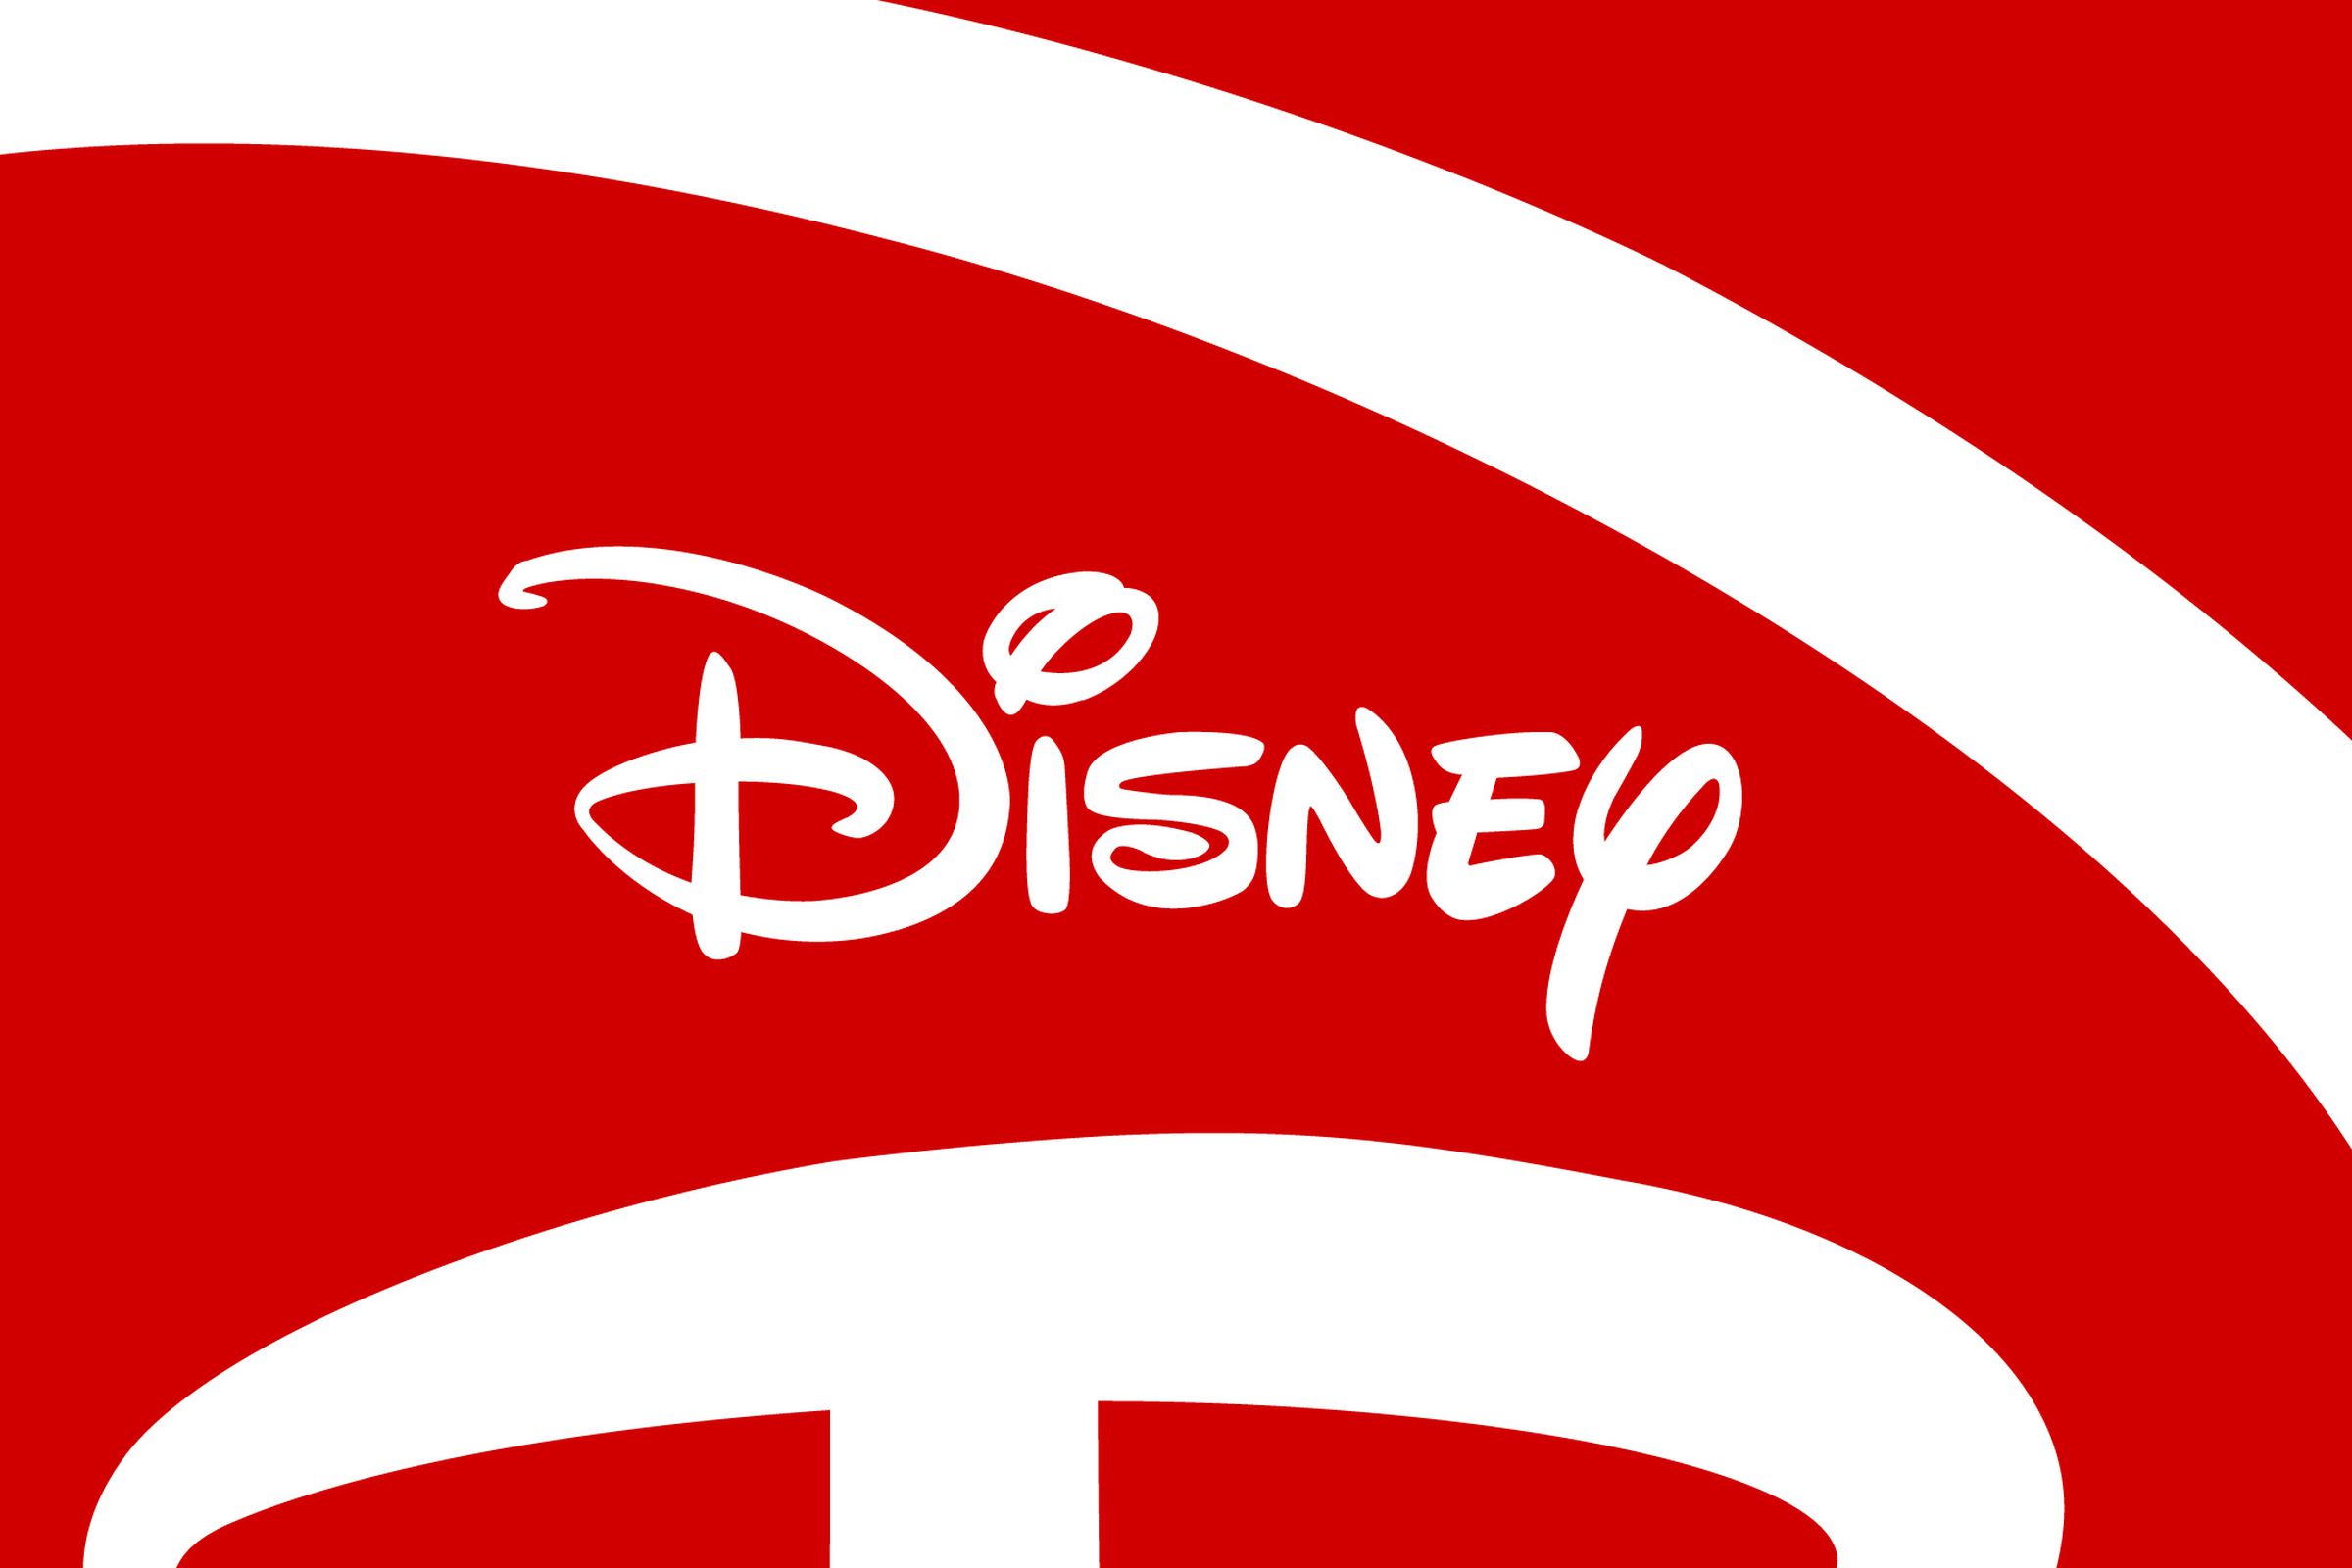 The Disney script logo inside a larger, cropped Disney “D” on a red background. The letters are white.